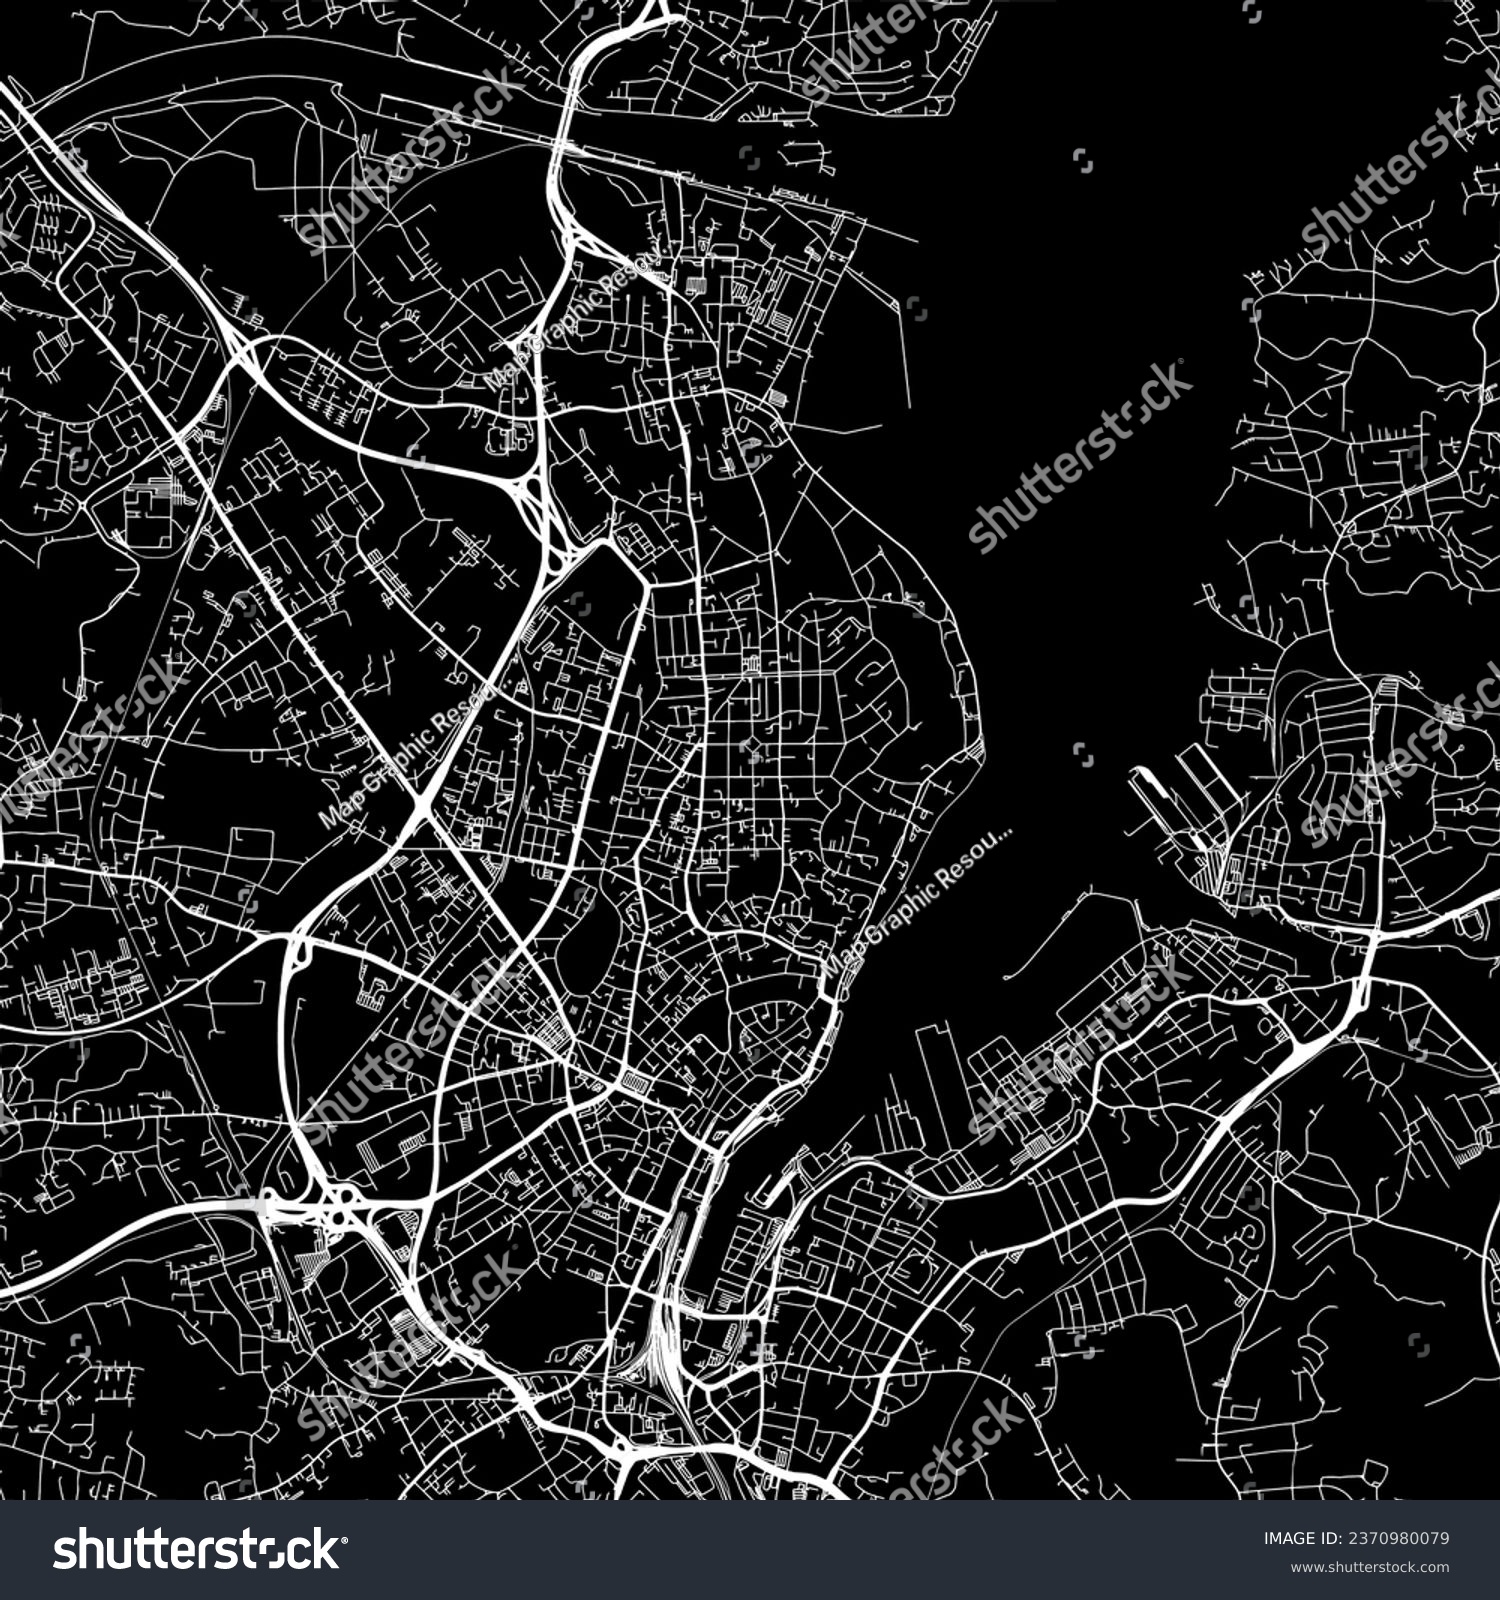 SVG of 1:1 square aspect ratio vector road map of the city of Kiel in Germany with white roads on a black background. svg